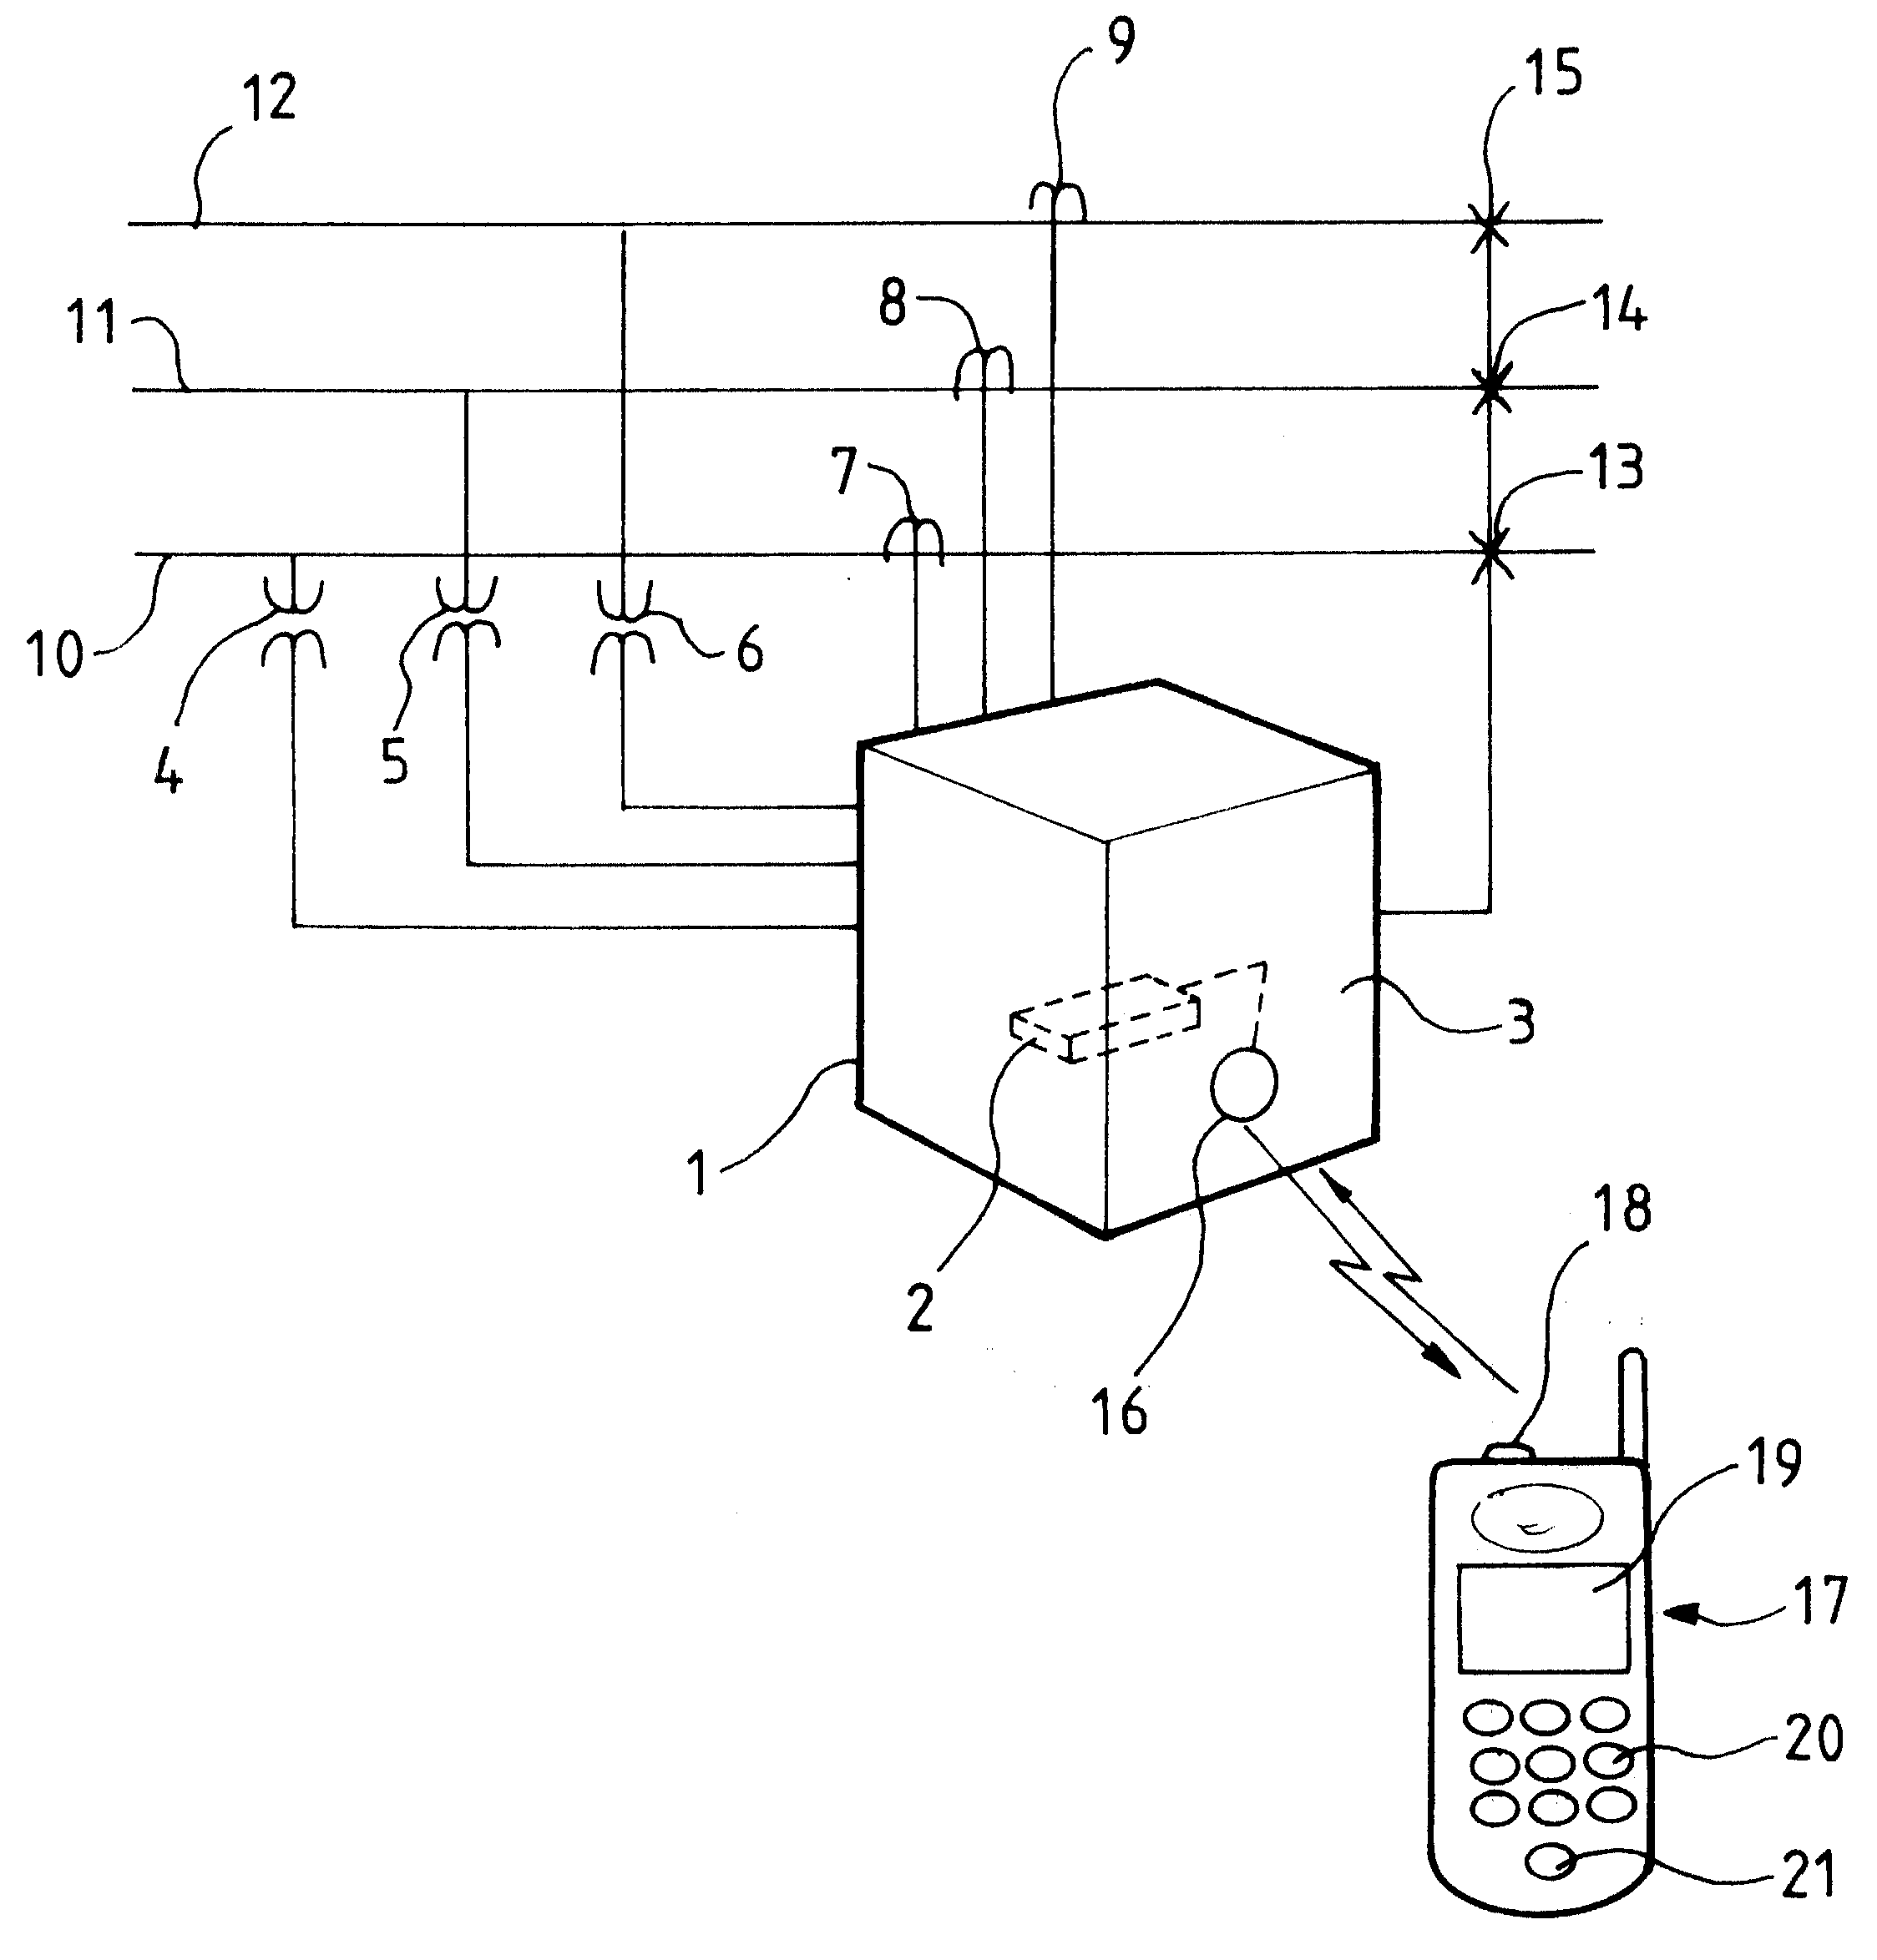 Protection system for an electricity network having a data transmission radio link